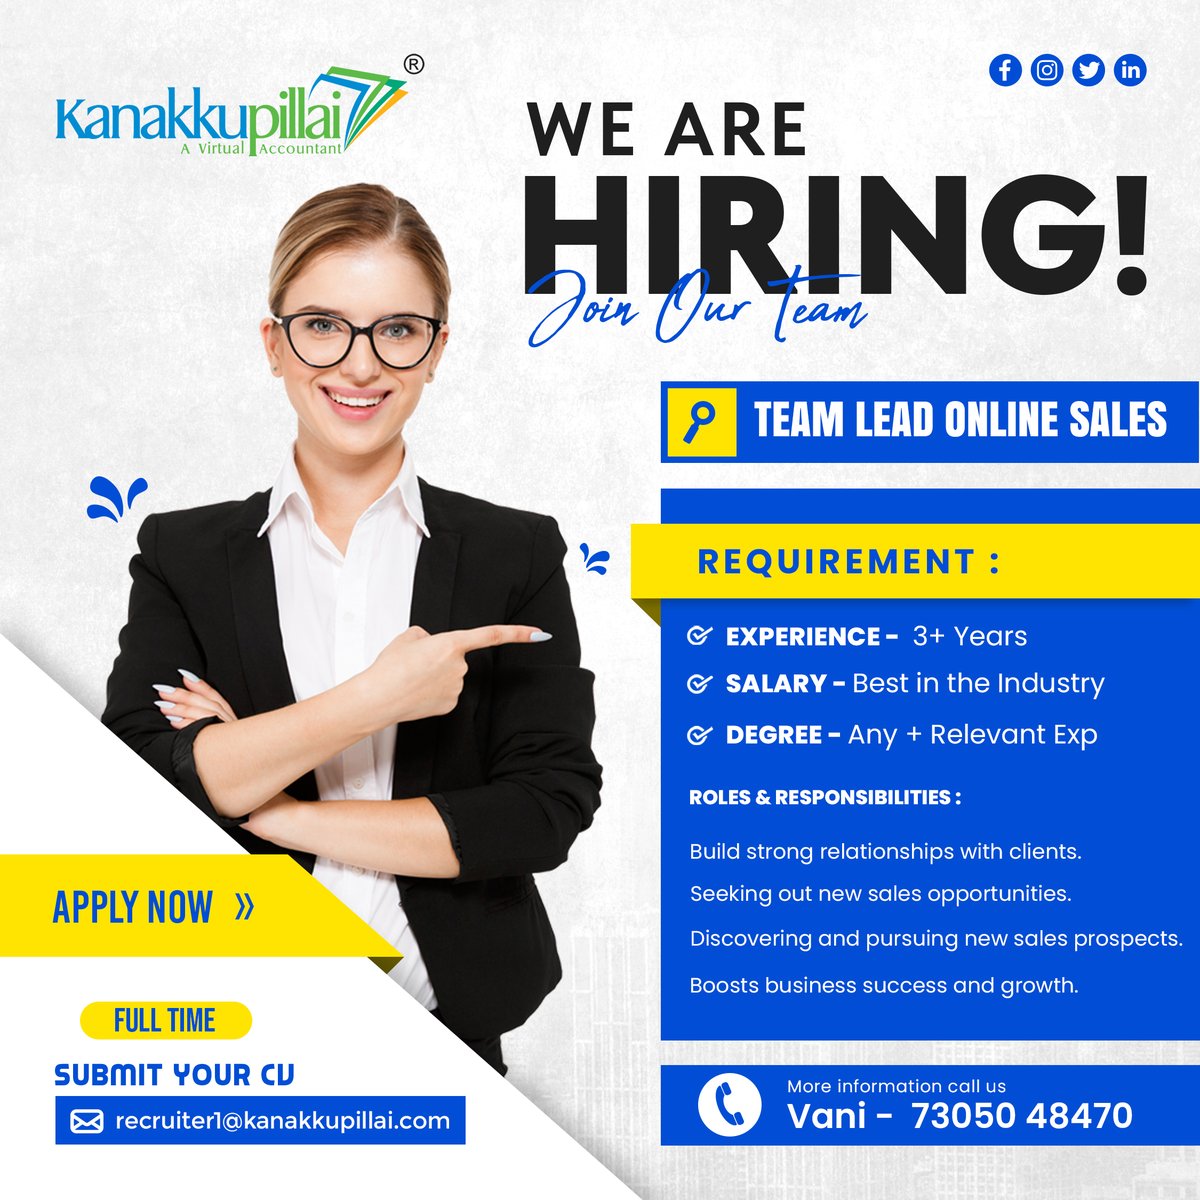 Exciting Announcement!📢 Looking for a new challenge?🔍 We are looking for a talented Online Sales #TeamLead to join our dynamic team🚀 Send your CV or Portfolio to recruiter1@kanakkupillai.com or 73050 48470 and take the first step towards an exciting #career with us! !💪